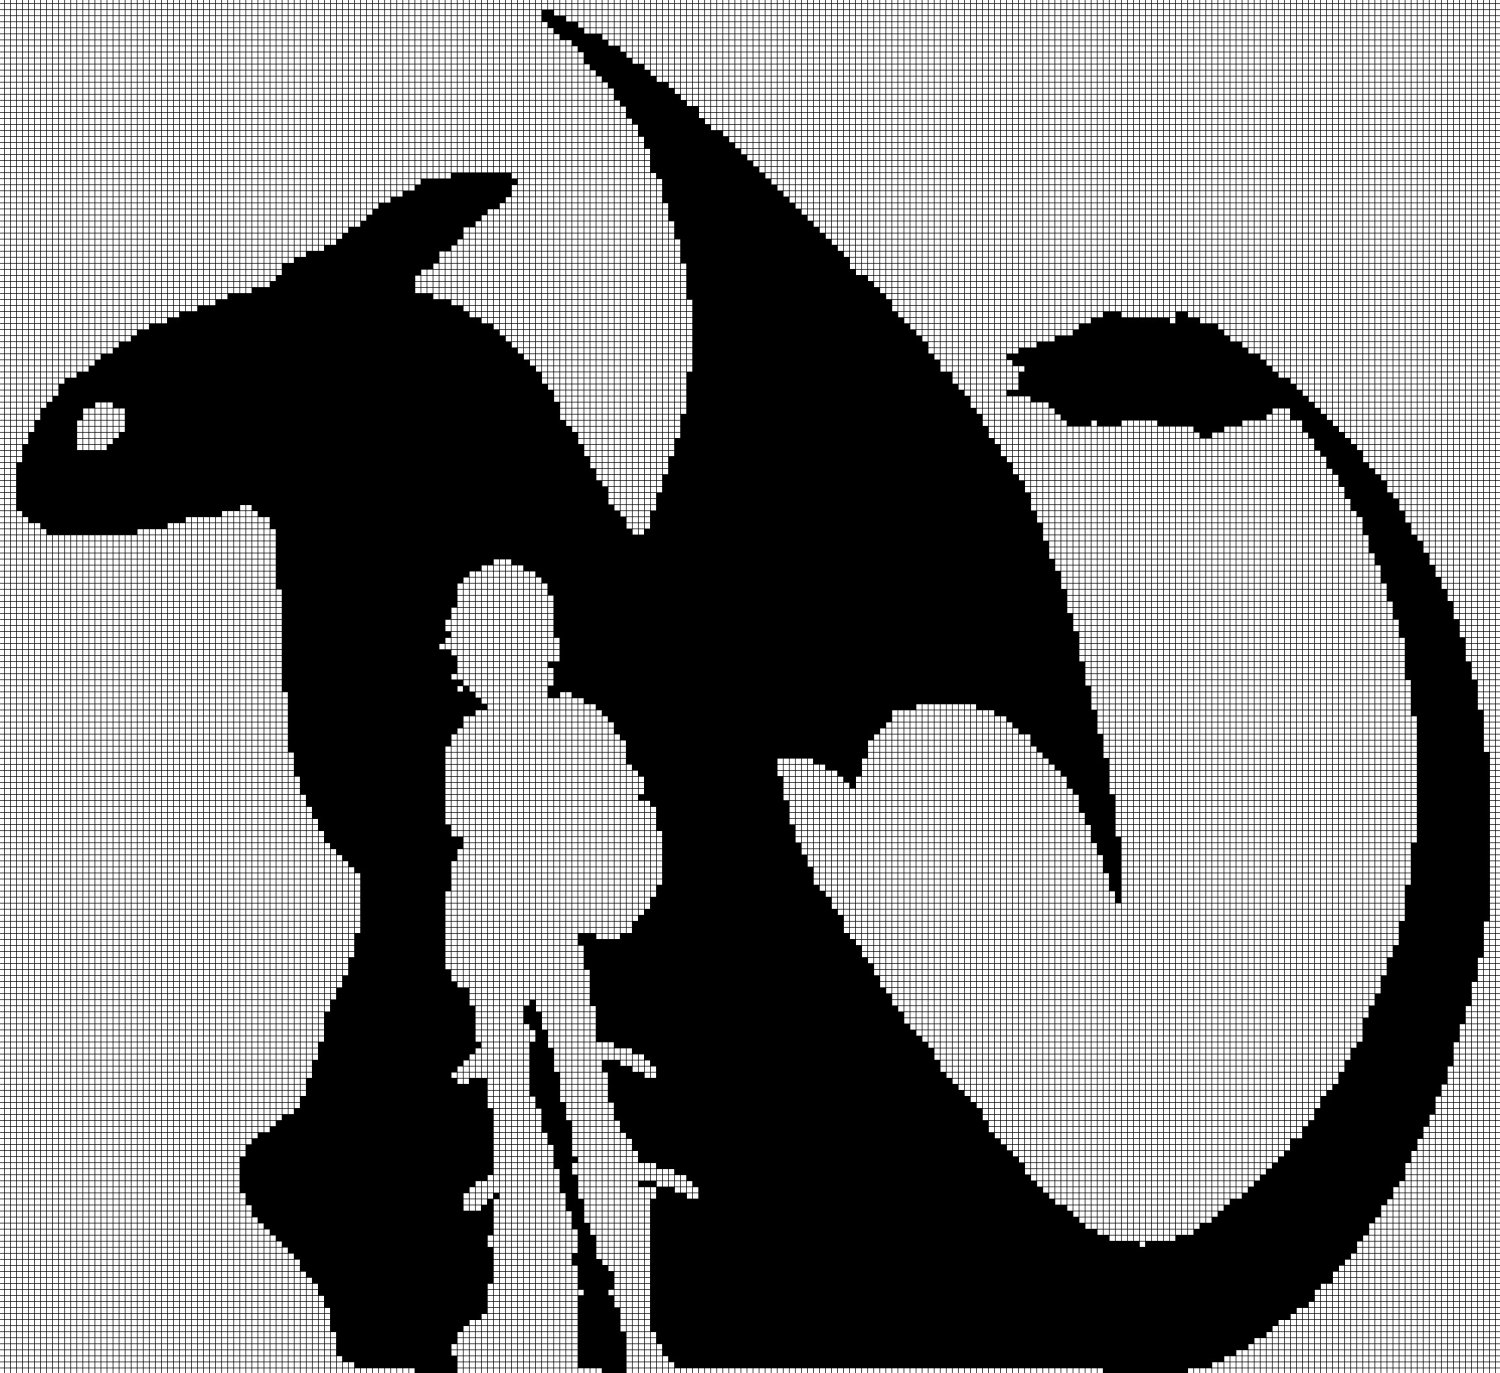 Toothless dragon silhouette cross stitch pattern in pdf